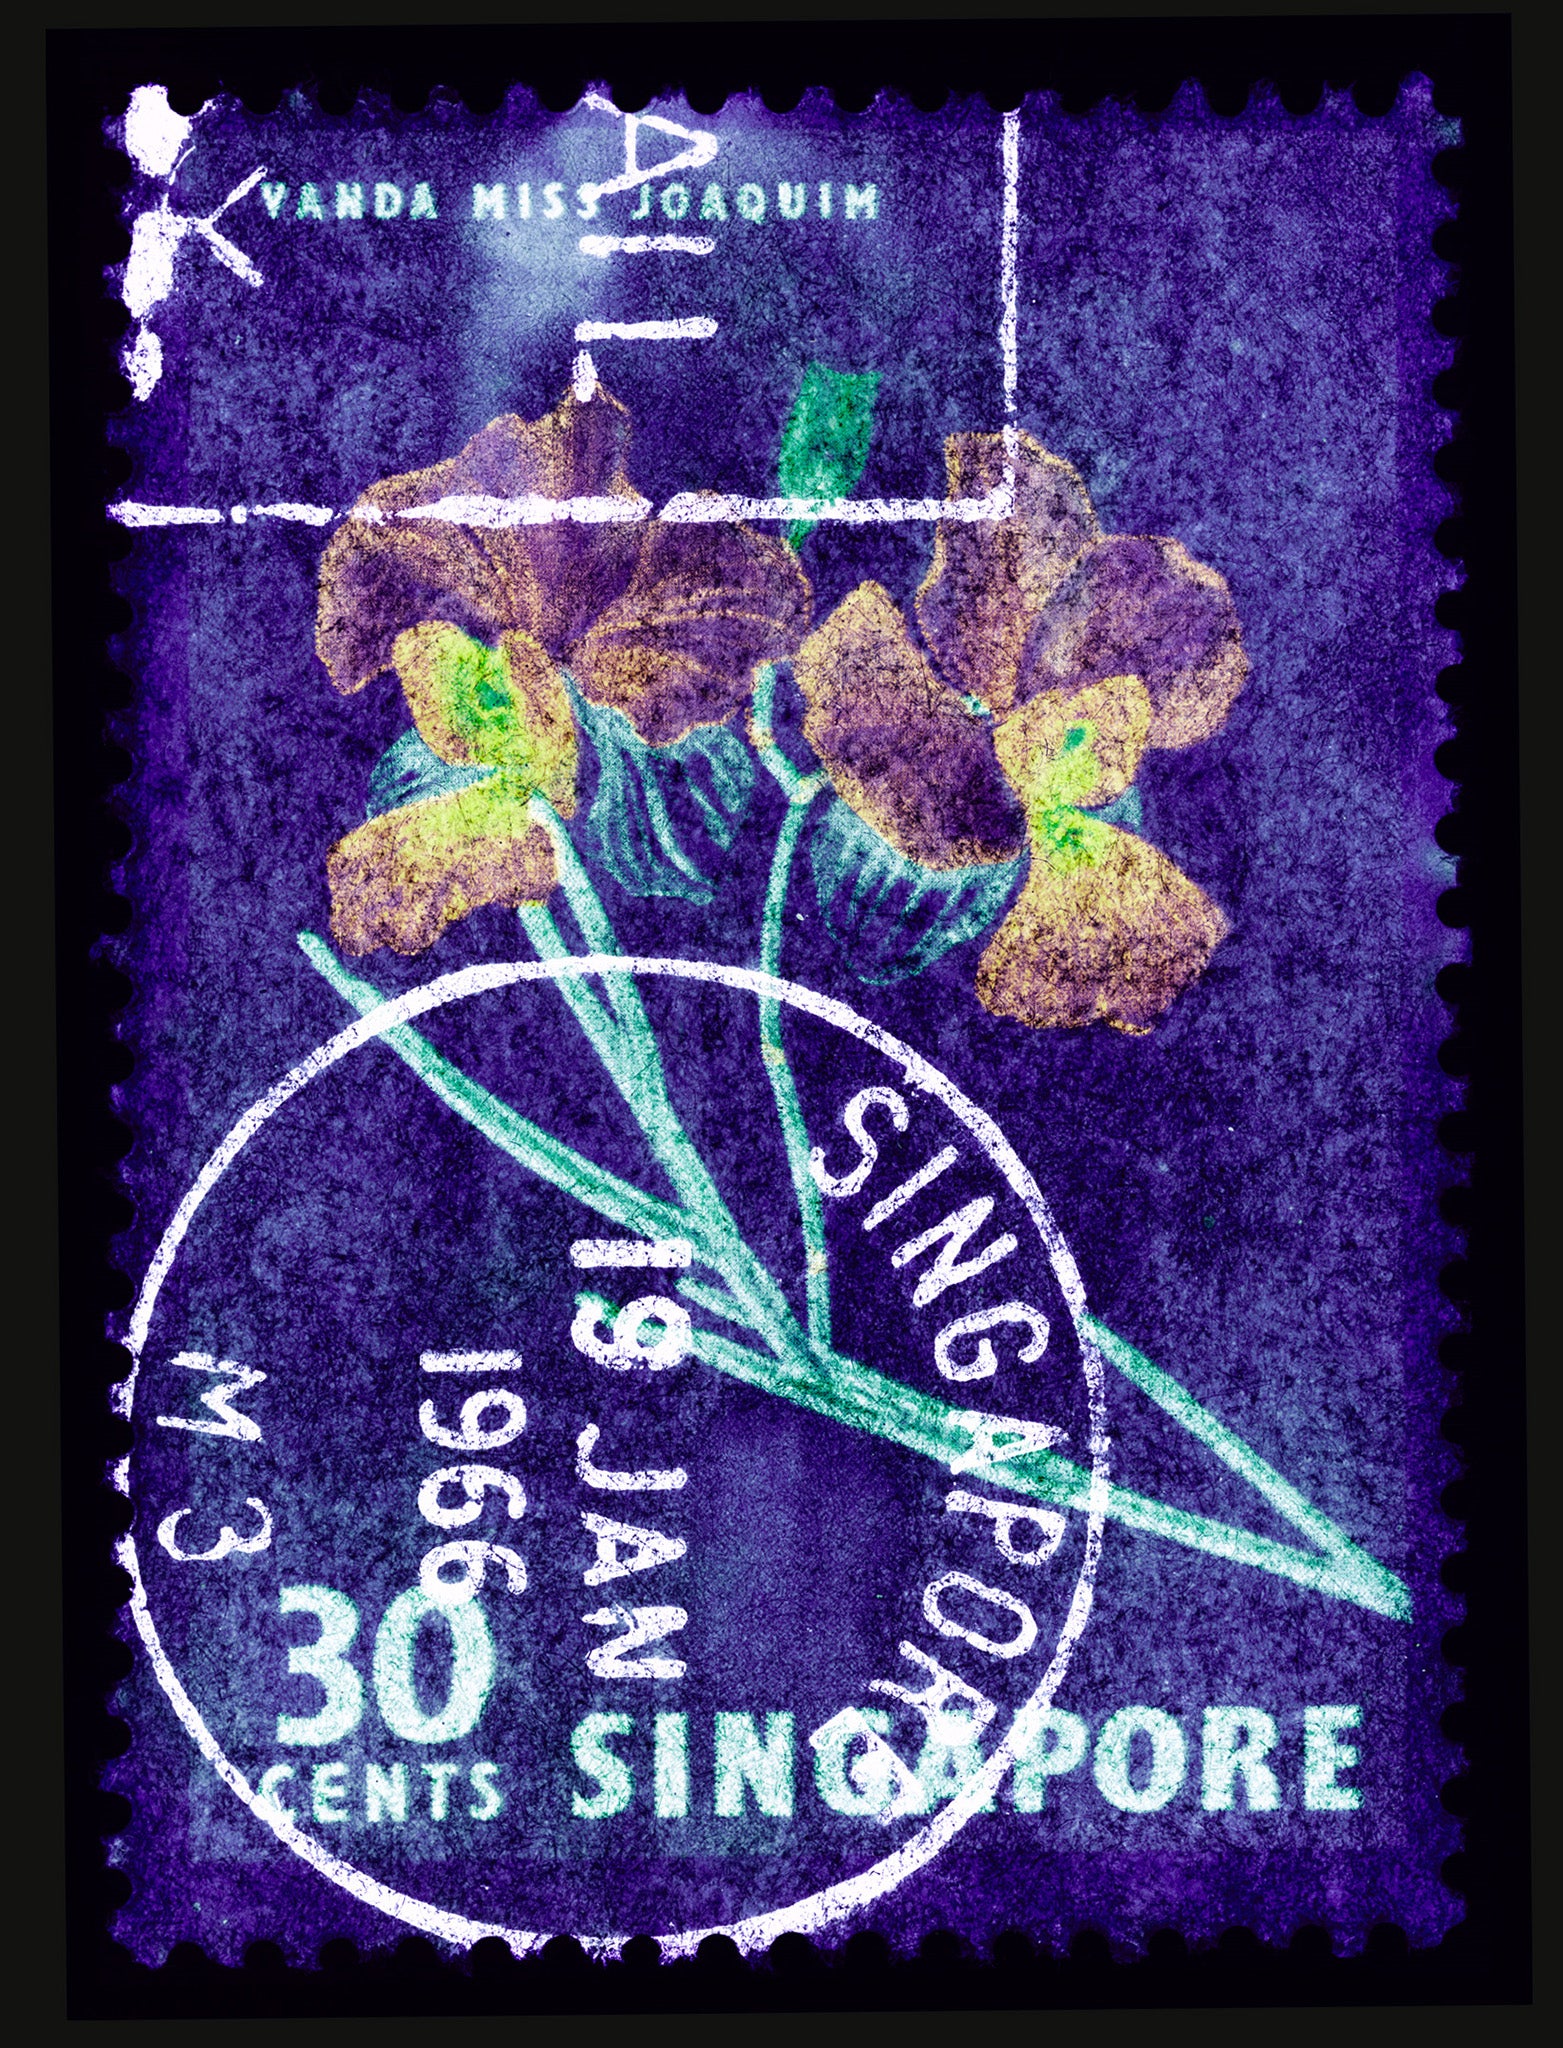 Singapore Stamp Collection '30 Cents Singapore Orchid Purple'. These historic postage stamps that make up the Heidler & Heeps Stamp Collection, Singapore Series 'Postcards from Afar' have been given a twenty-first century pop art lease of life. The fine detailed tapestry of the original small postage stamp has been brought to life, made unique by the franking stamp and Heidler & Heeps specialist darkroom process.